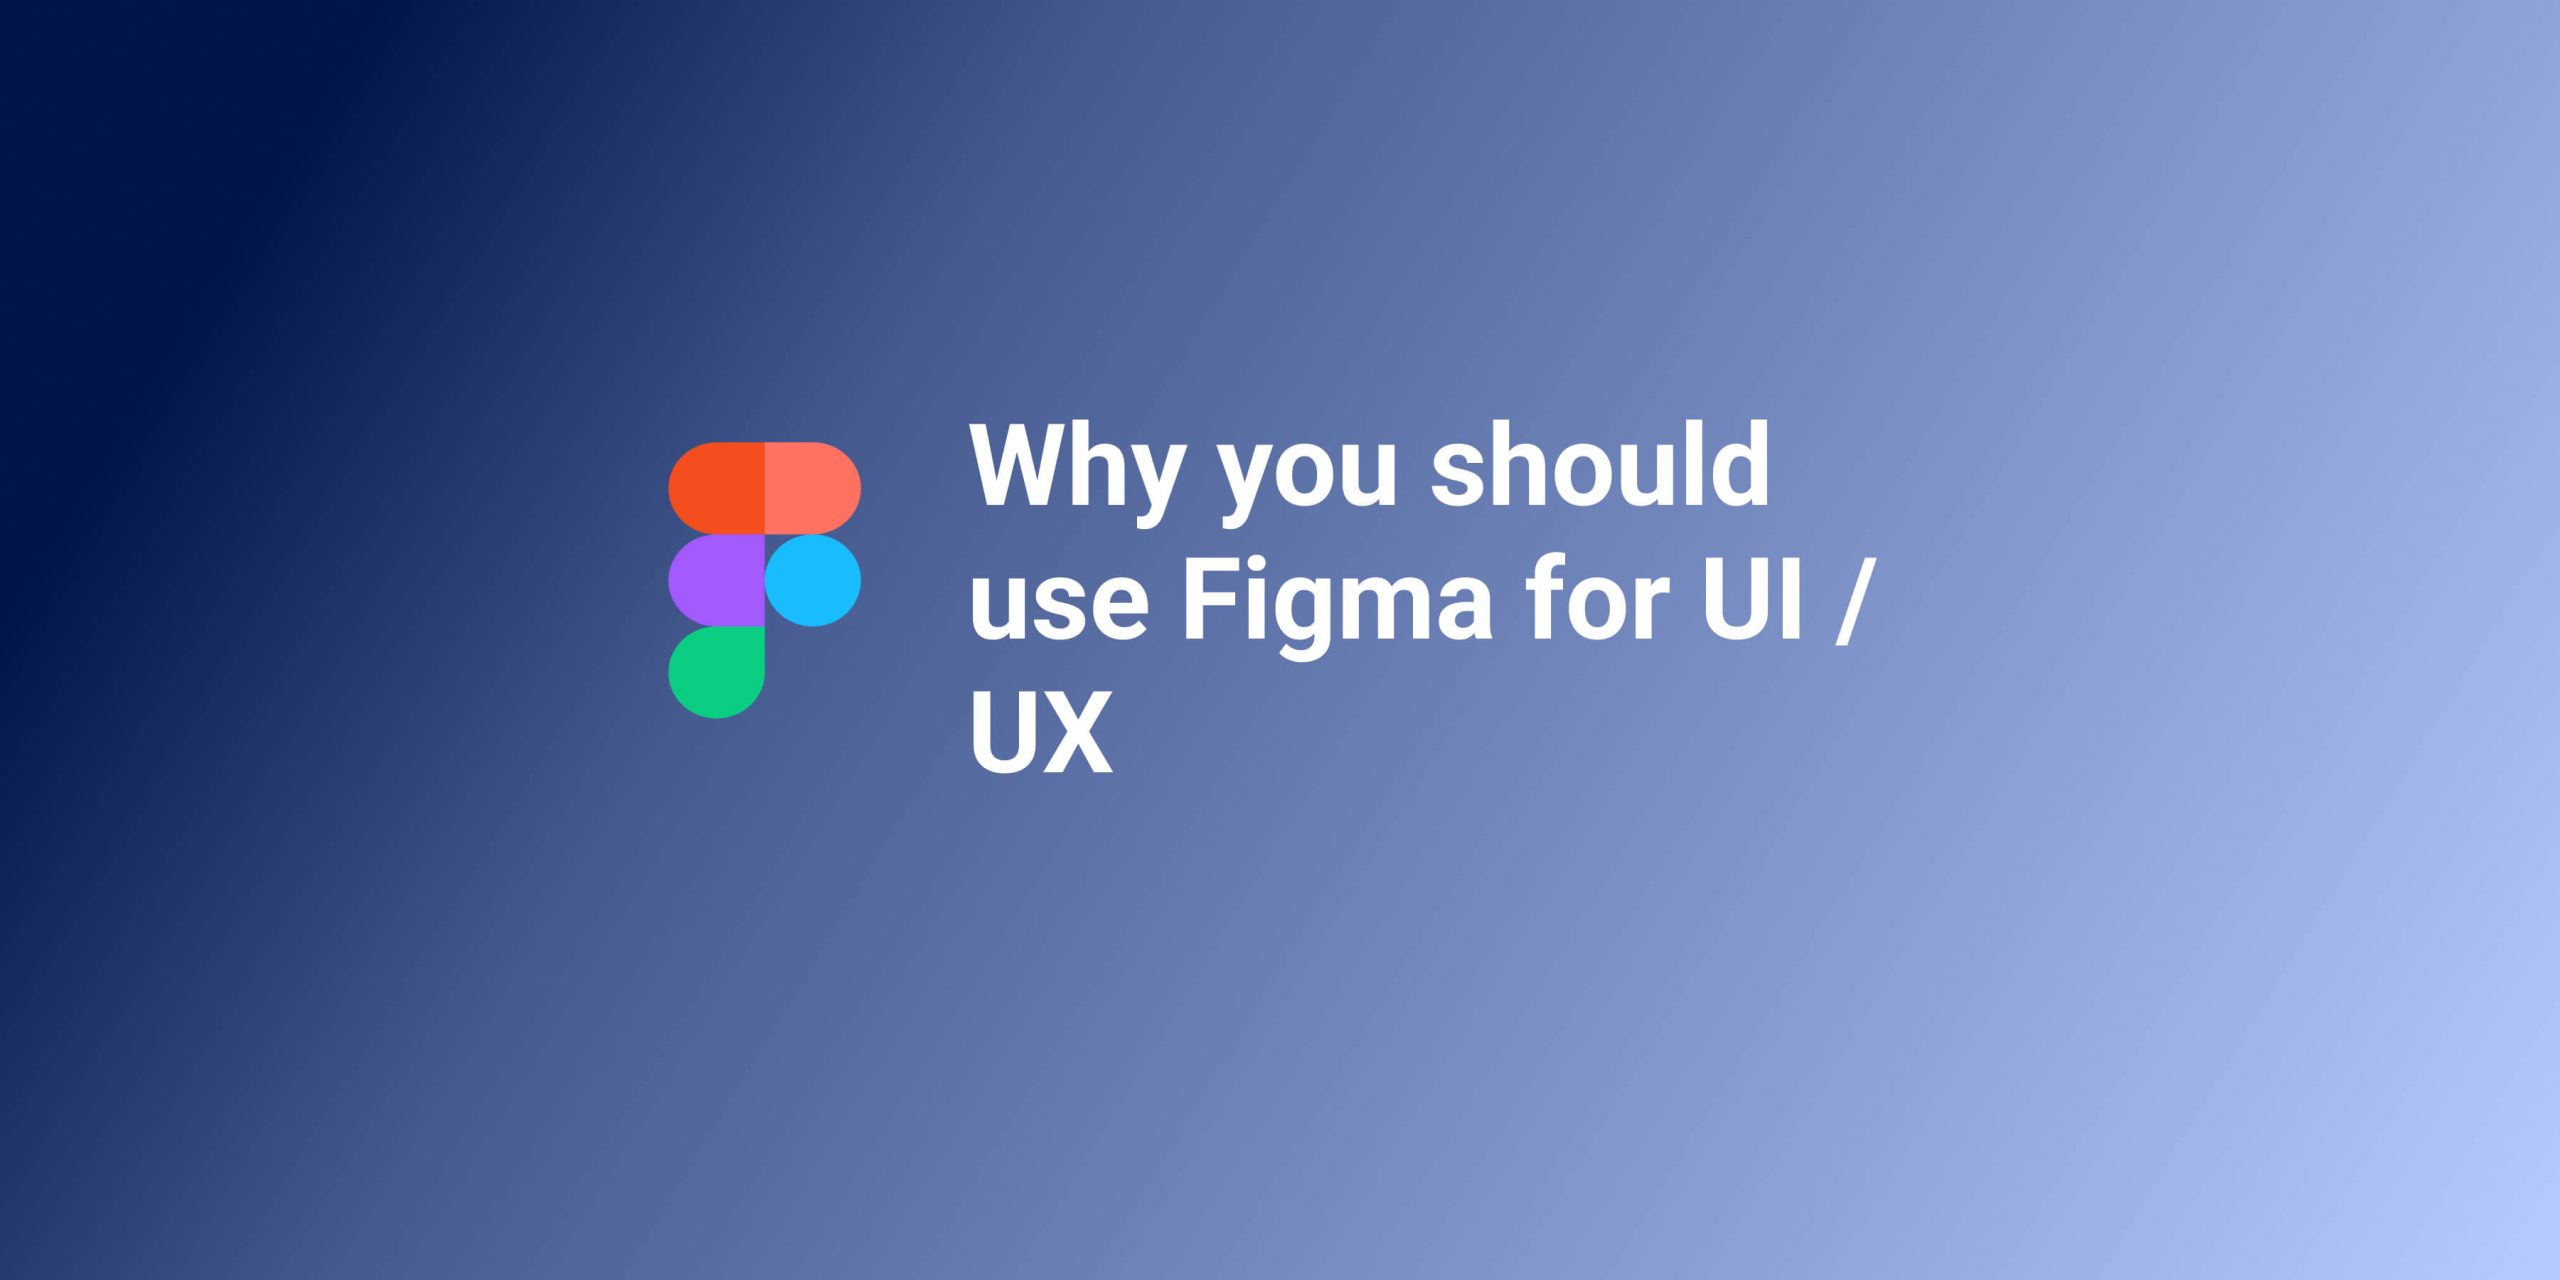 Why use figma for uI/UX